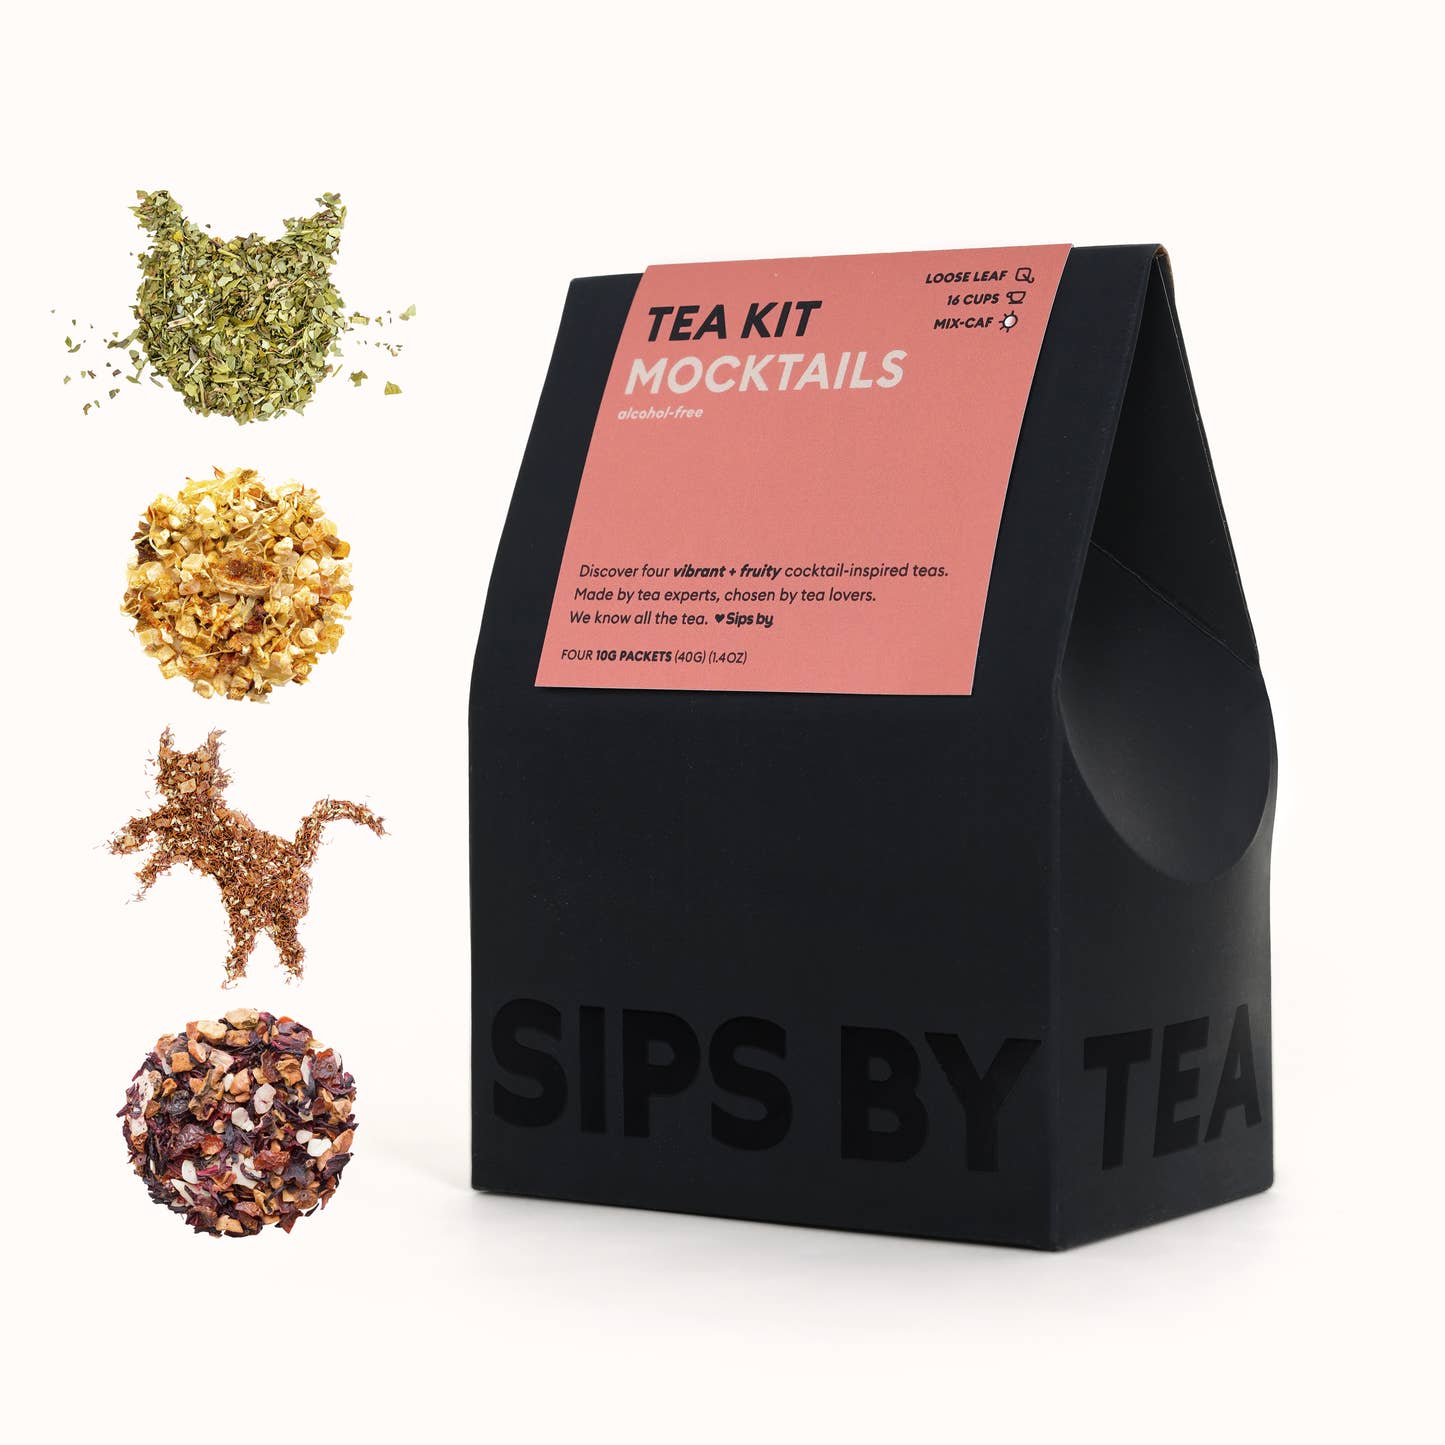 Black box with a red topper that says "Mocktails Tea Kit - Made by tea experts, chosen by tea lovers. We know all the tea. Love Sips by. Makes 16 Cups. Four 10G Packets (40G) (1.4OZ)"